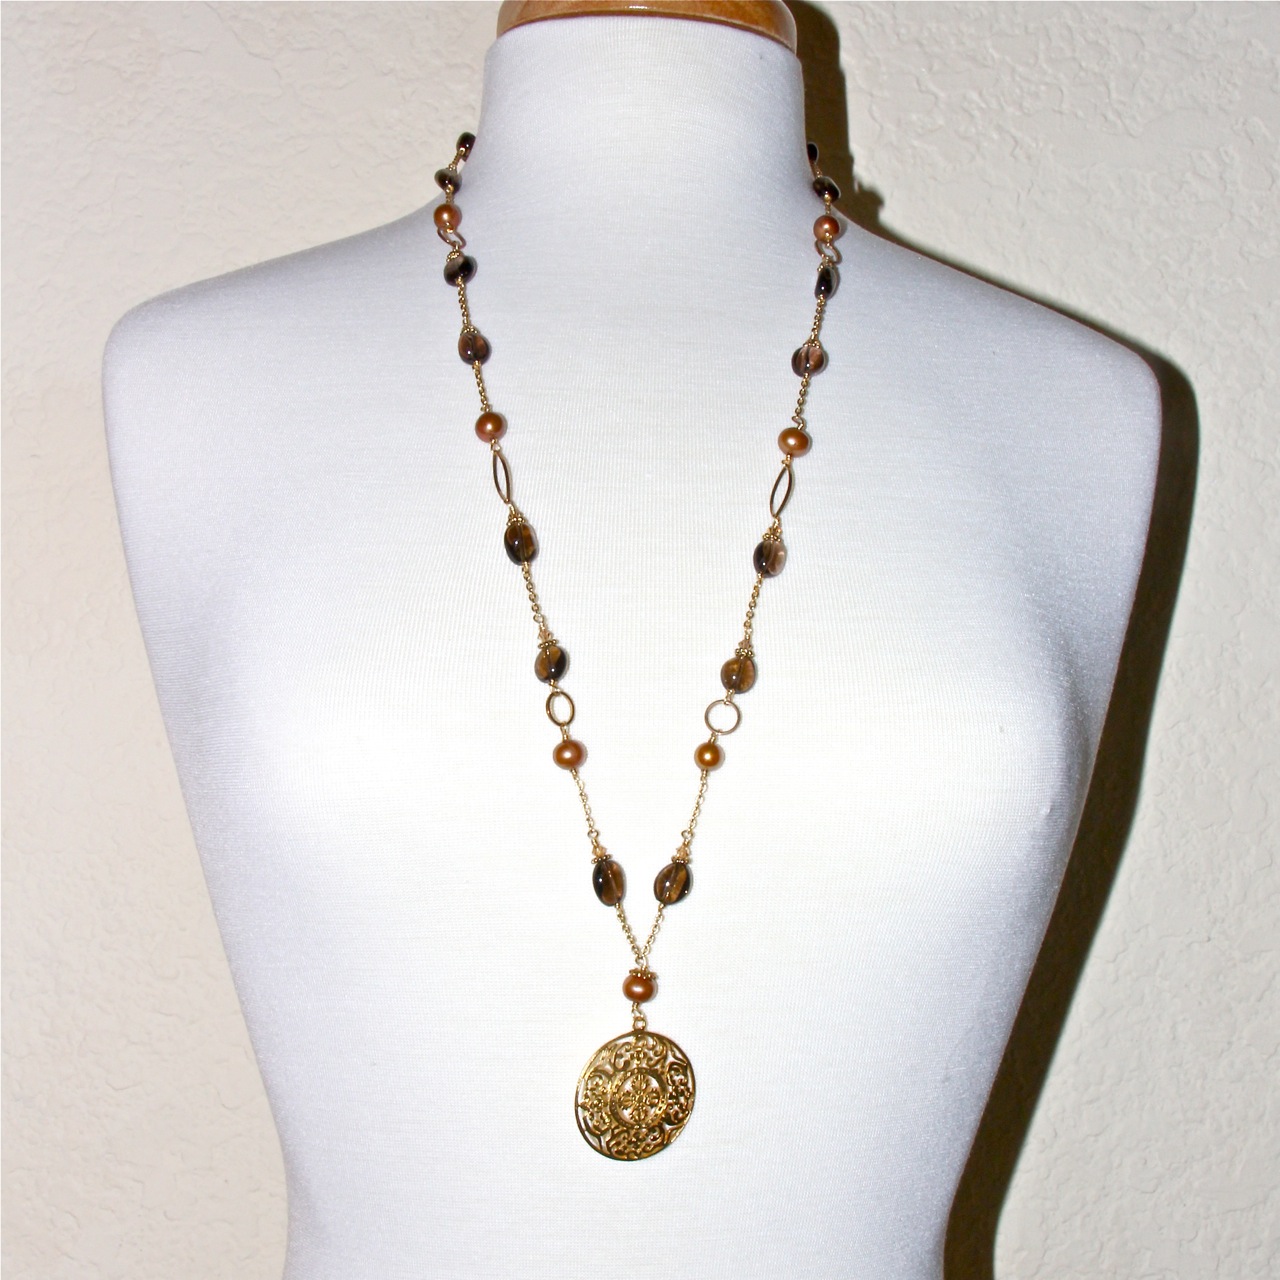 Golden Double Dorje Necklace with Smokey Quartz and Bronze Pearls ...